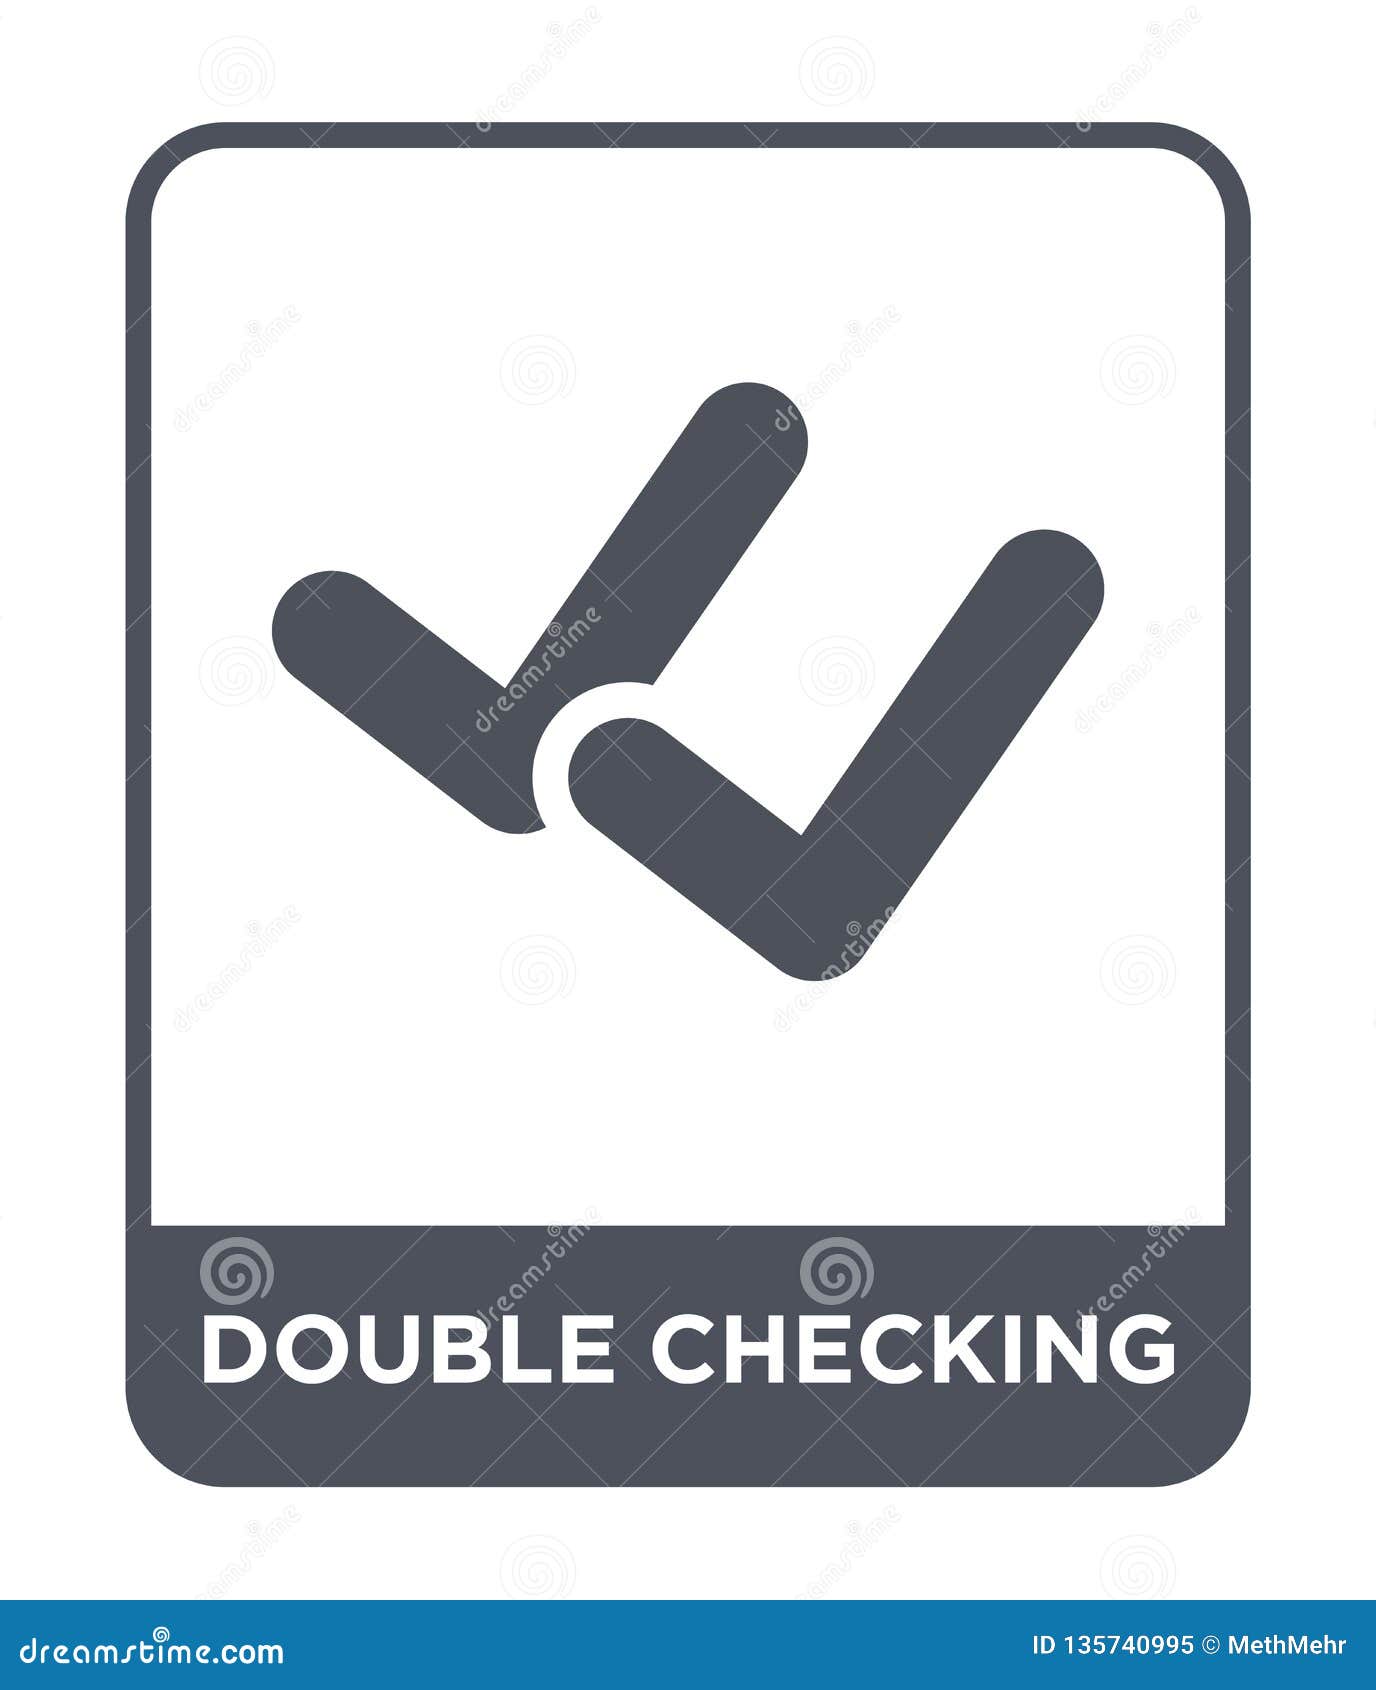 DOUBLE CHECK concept stock illustration. Illustration of cash - 150100068